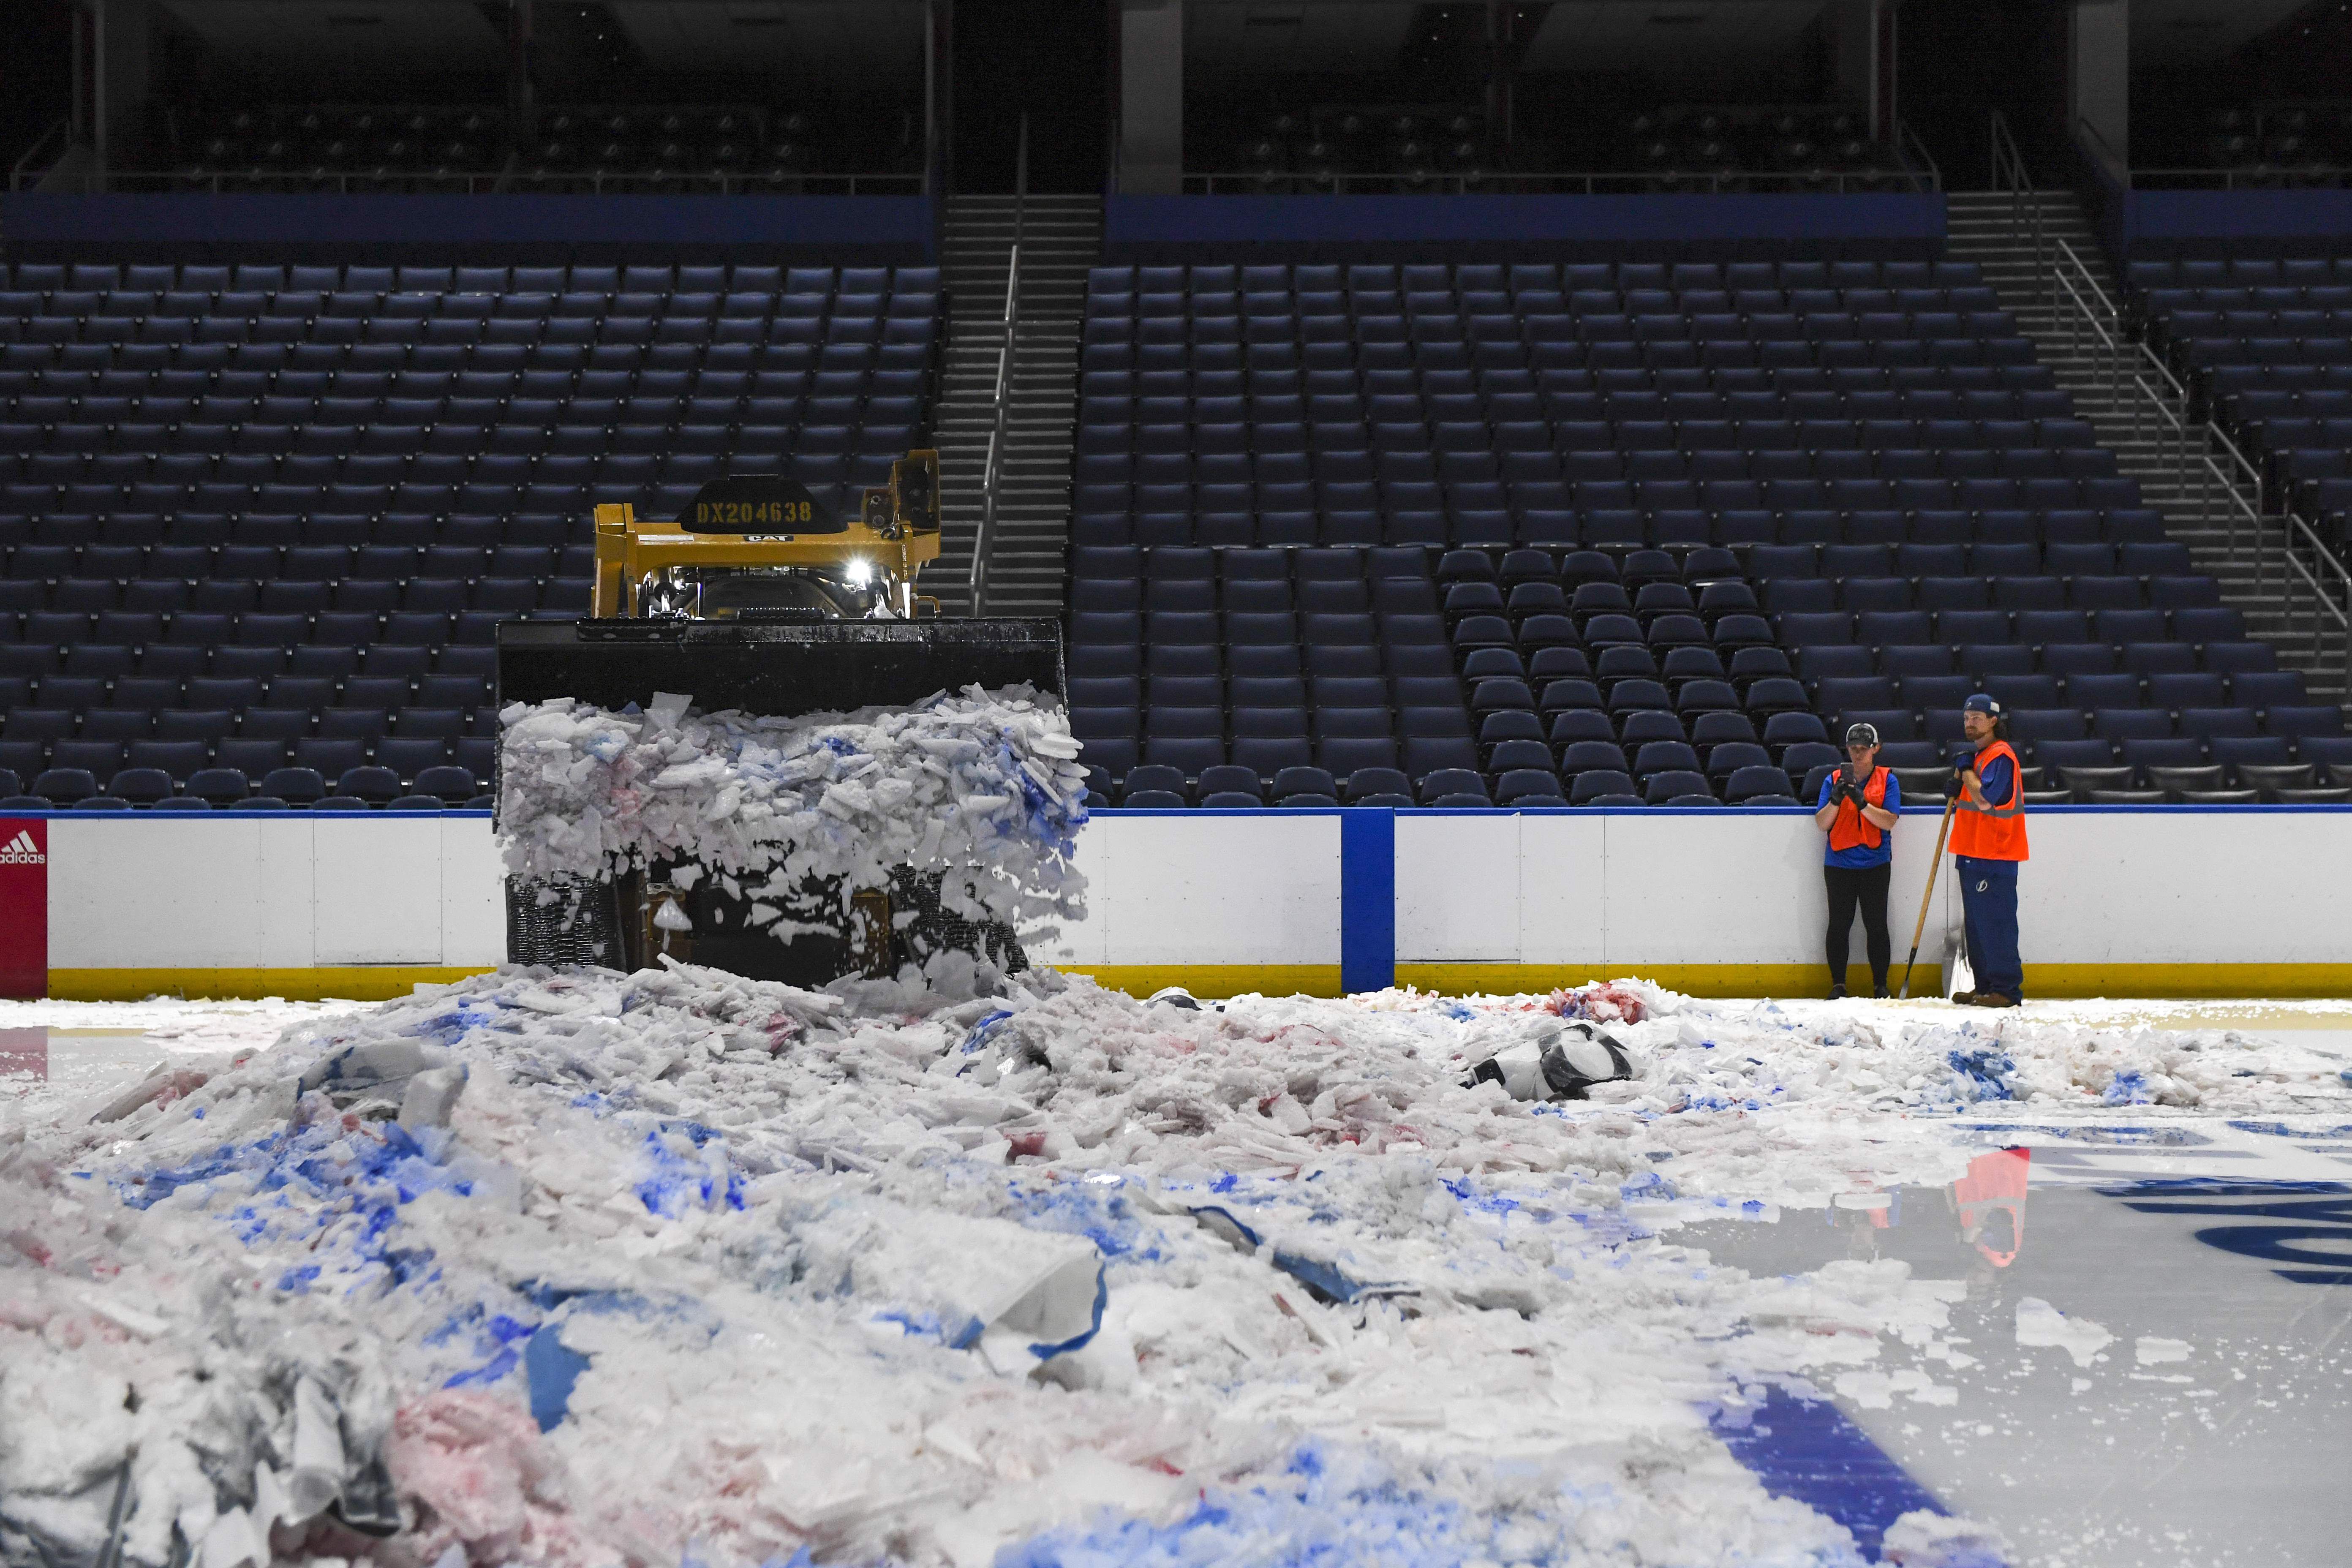 Rink ice from Tampa Bay Lightning's Amalie Arena used in limited